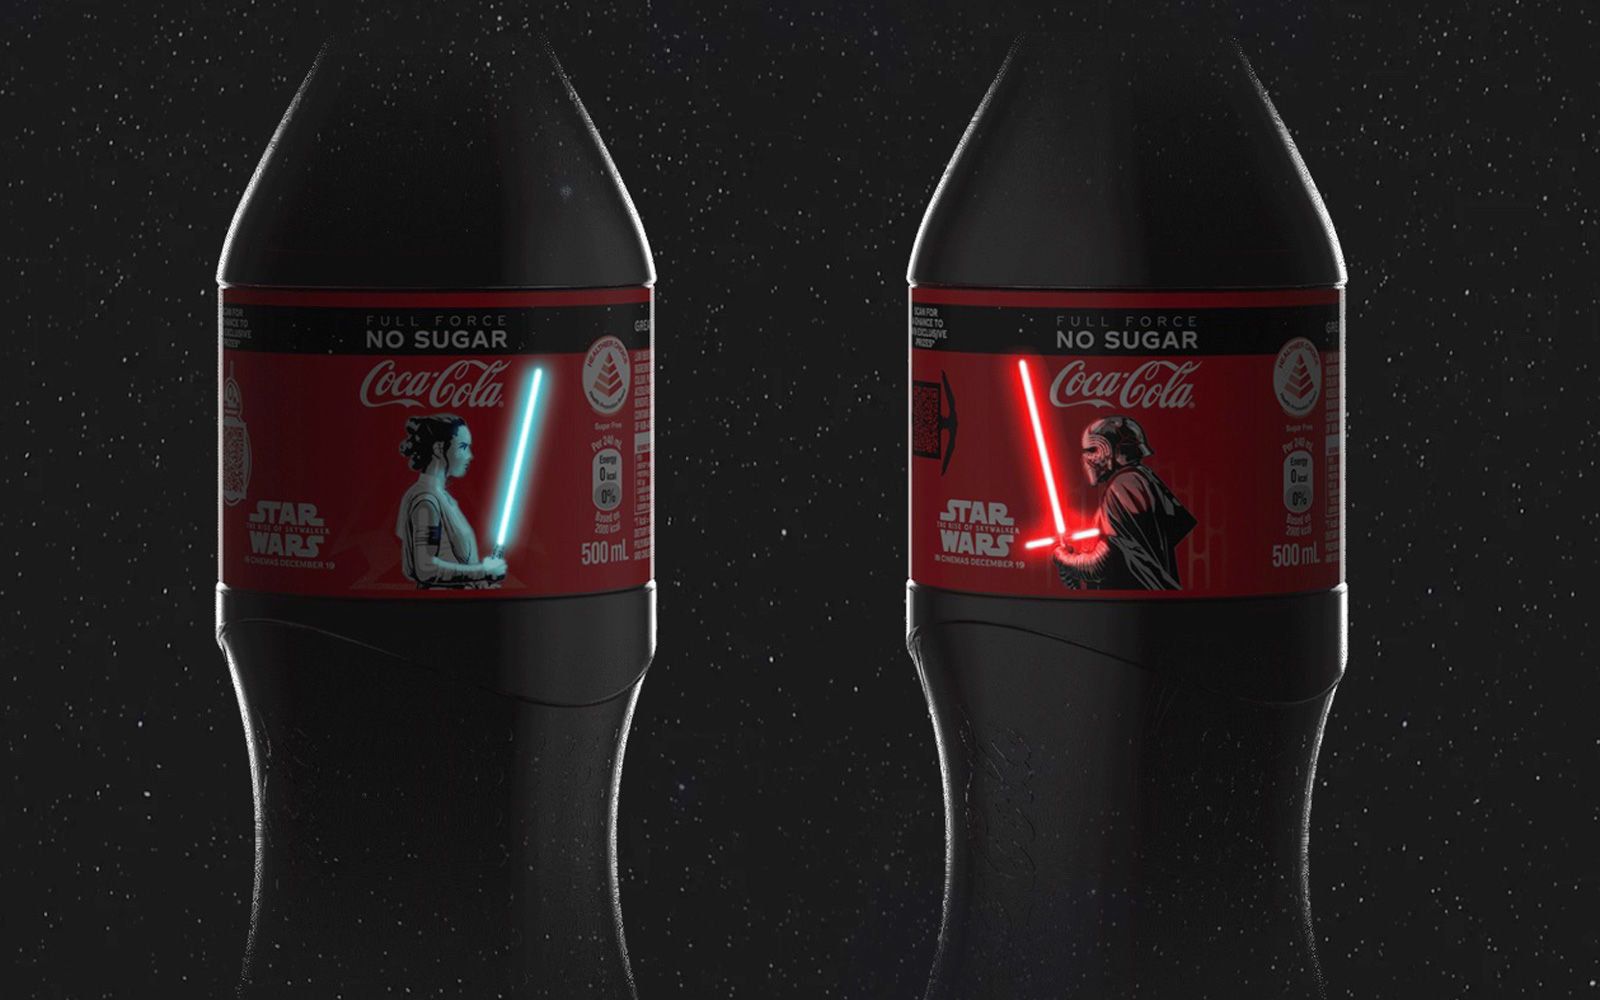 OLED Used To Bring Star Wars Lightsabers To Life On Coca Cola Bottles